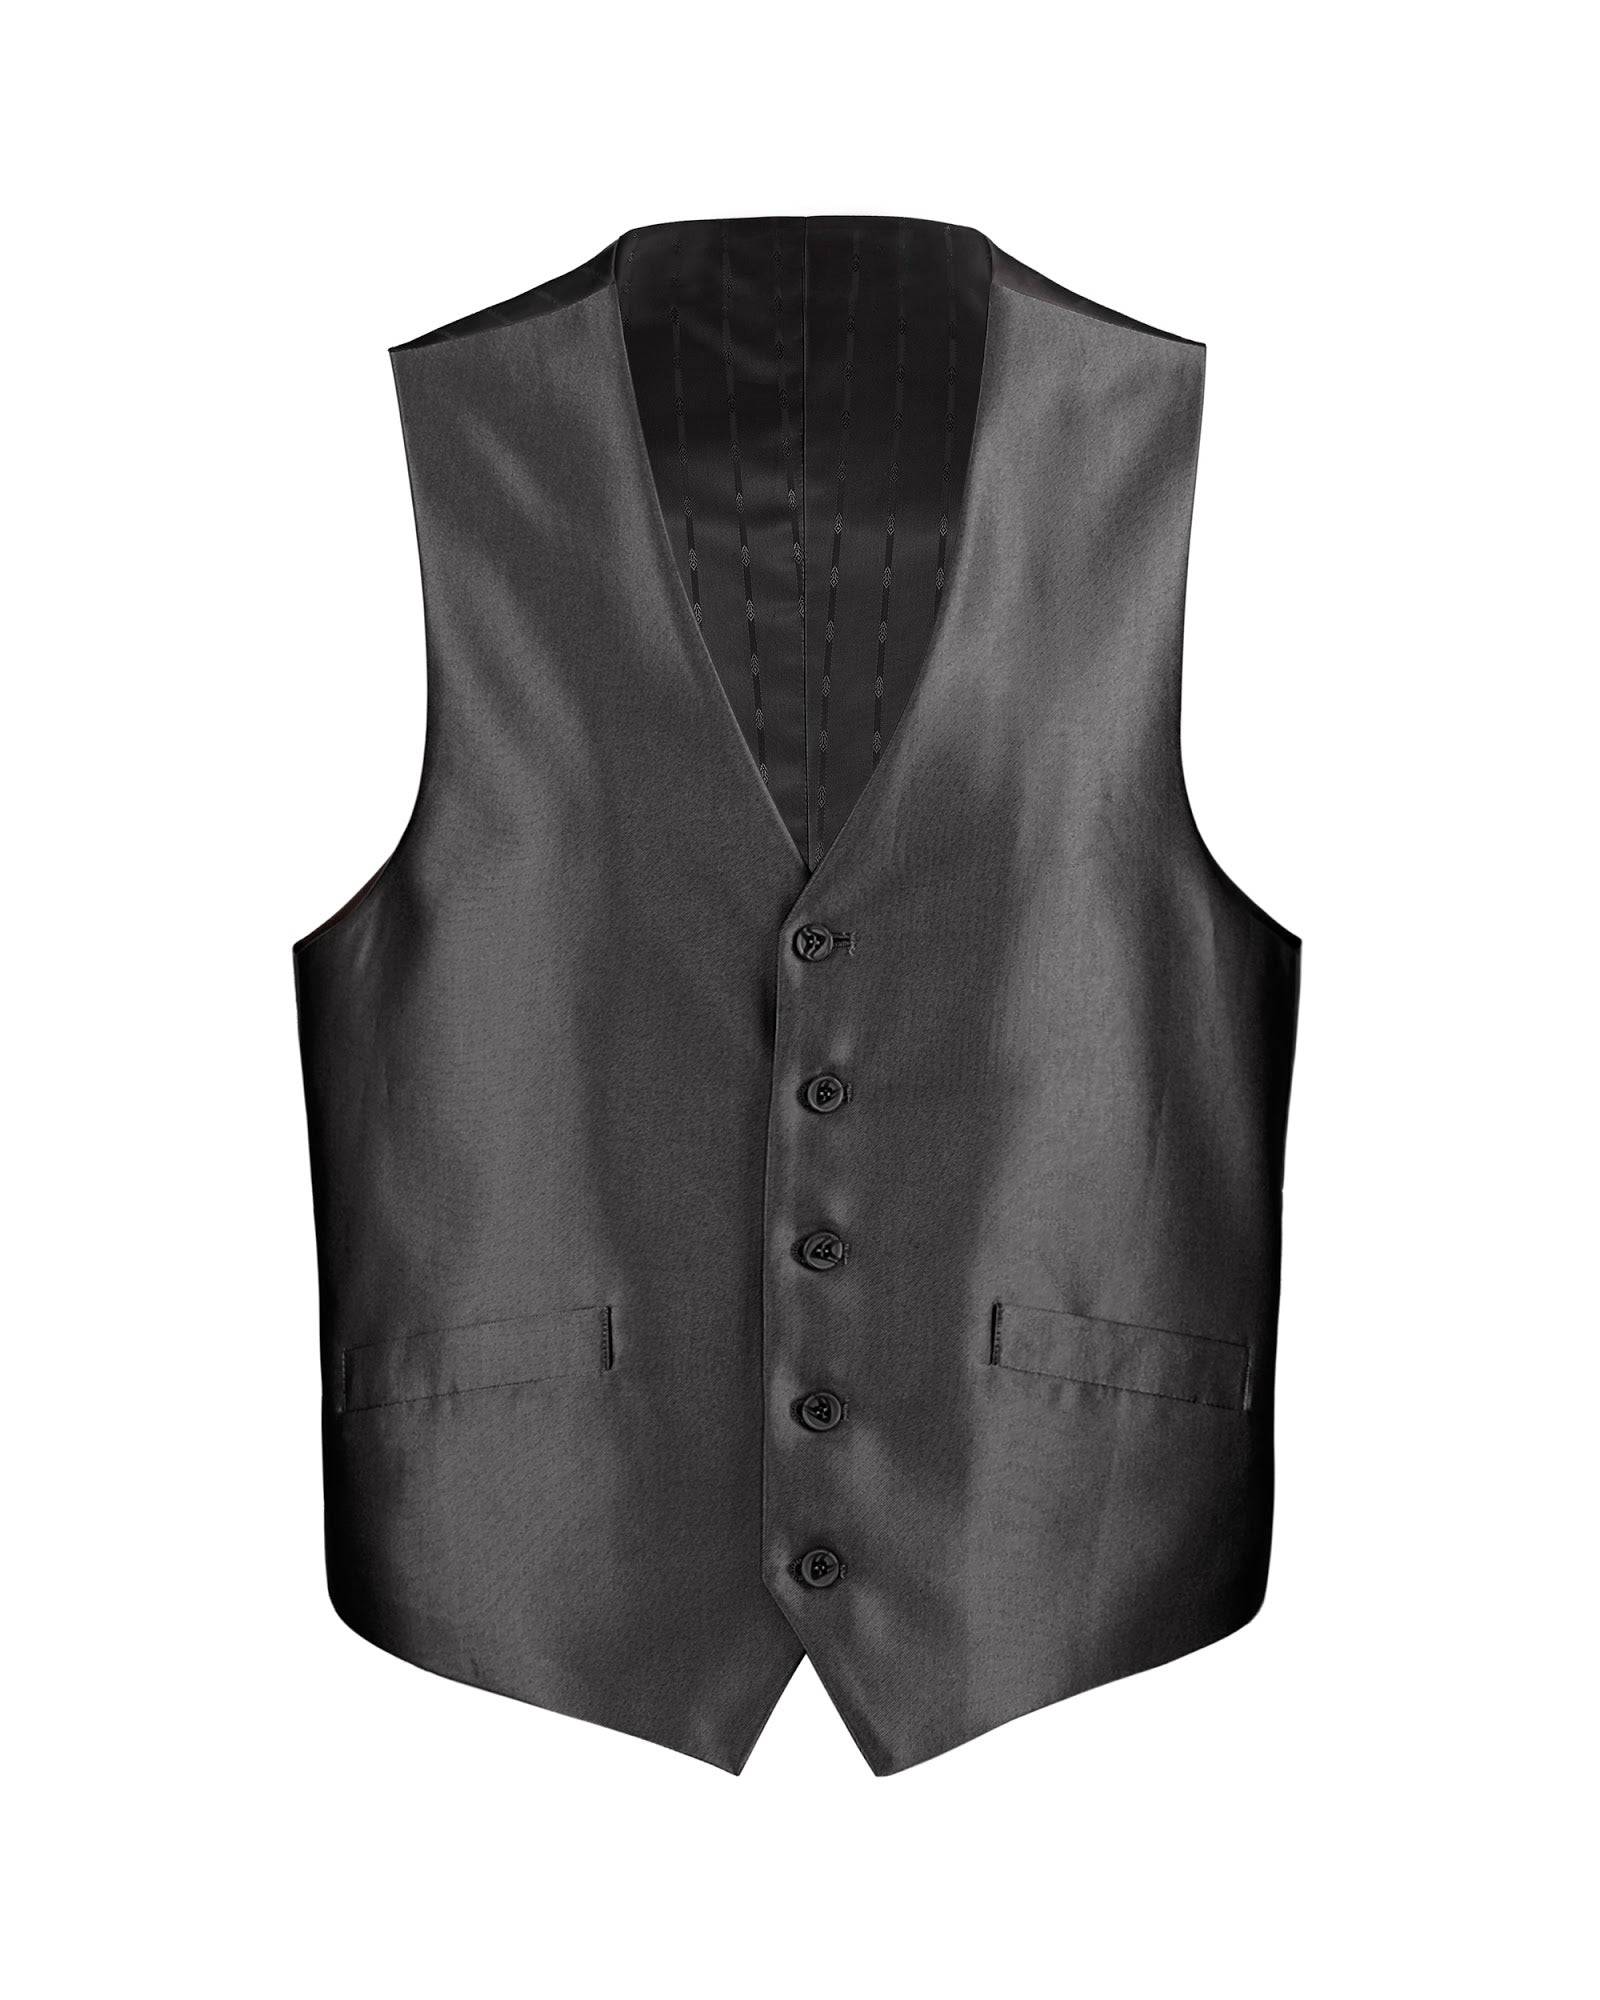 Suit Vest Luster Charcoal - Rainwater's Men's Clothing and Tuxedo Rental